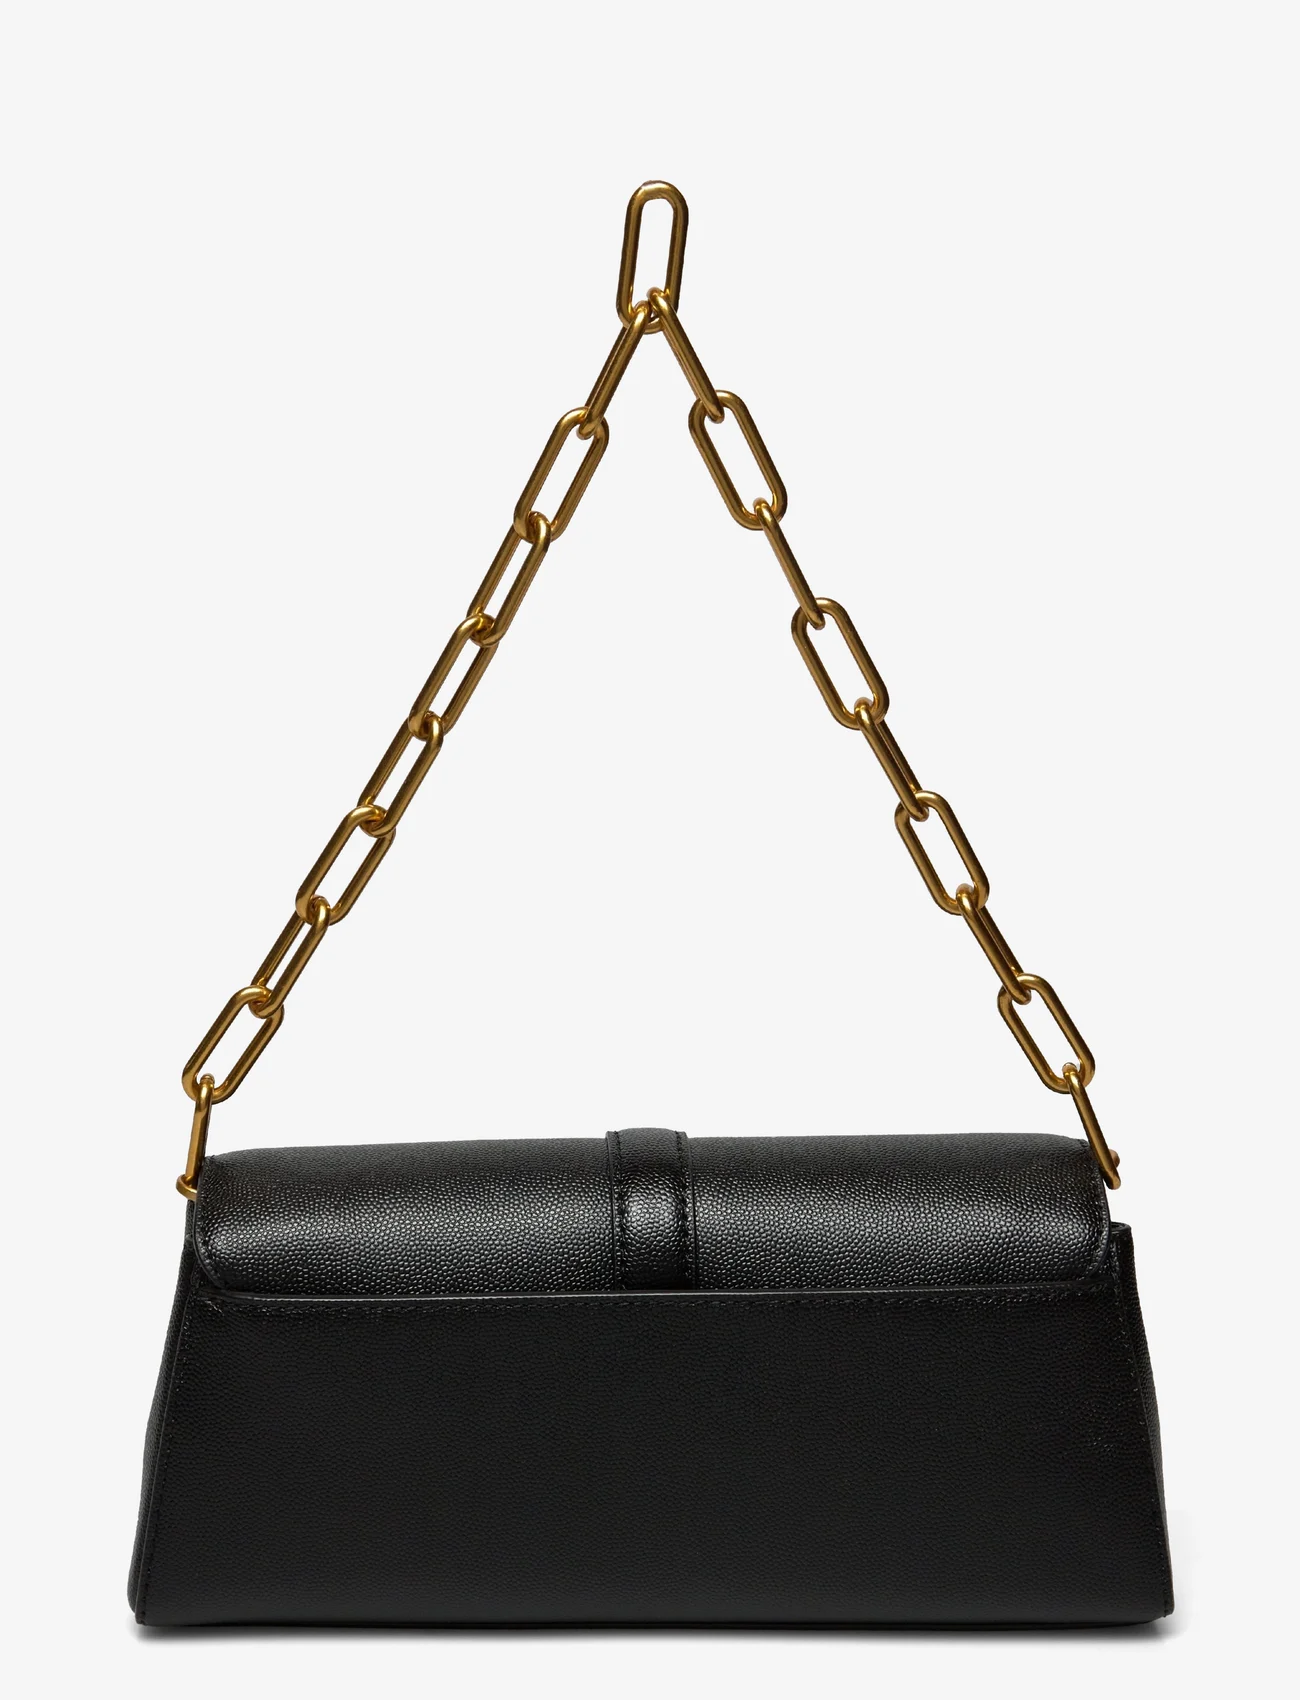 DKNY Bags - CONNER CLUTCH - bgd - blk/gold - 1